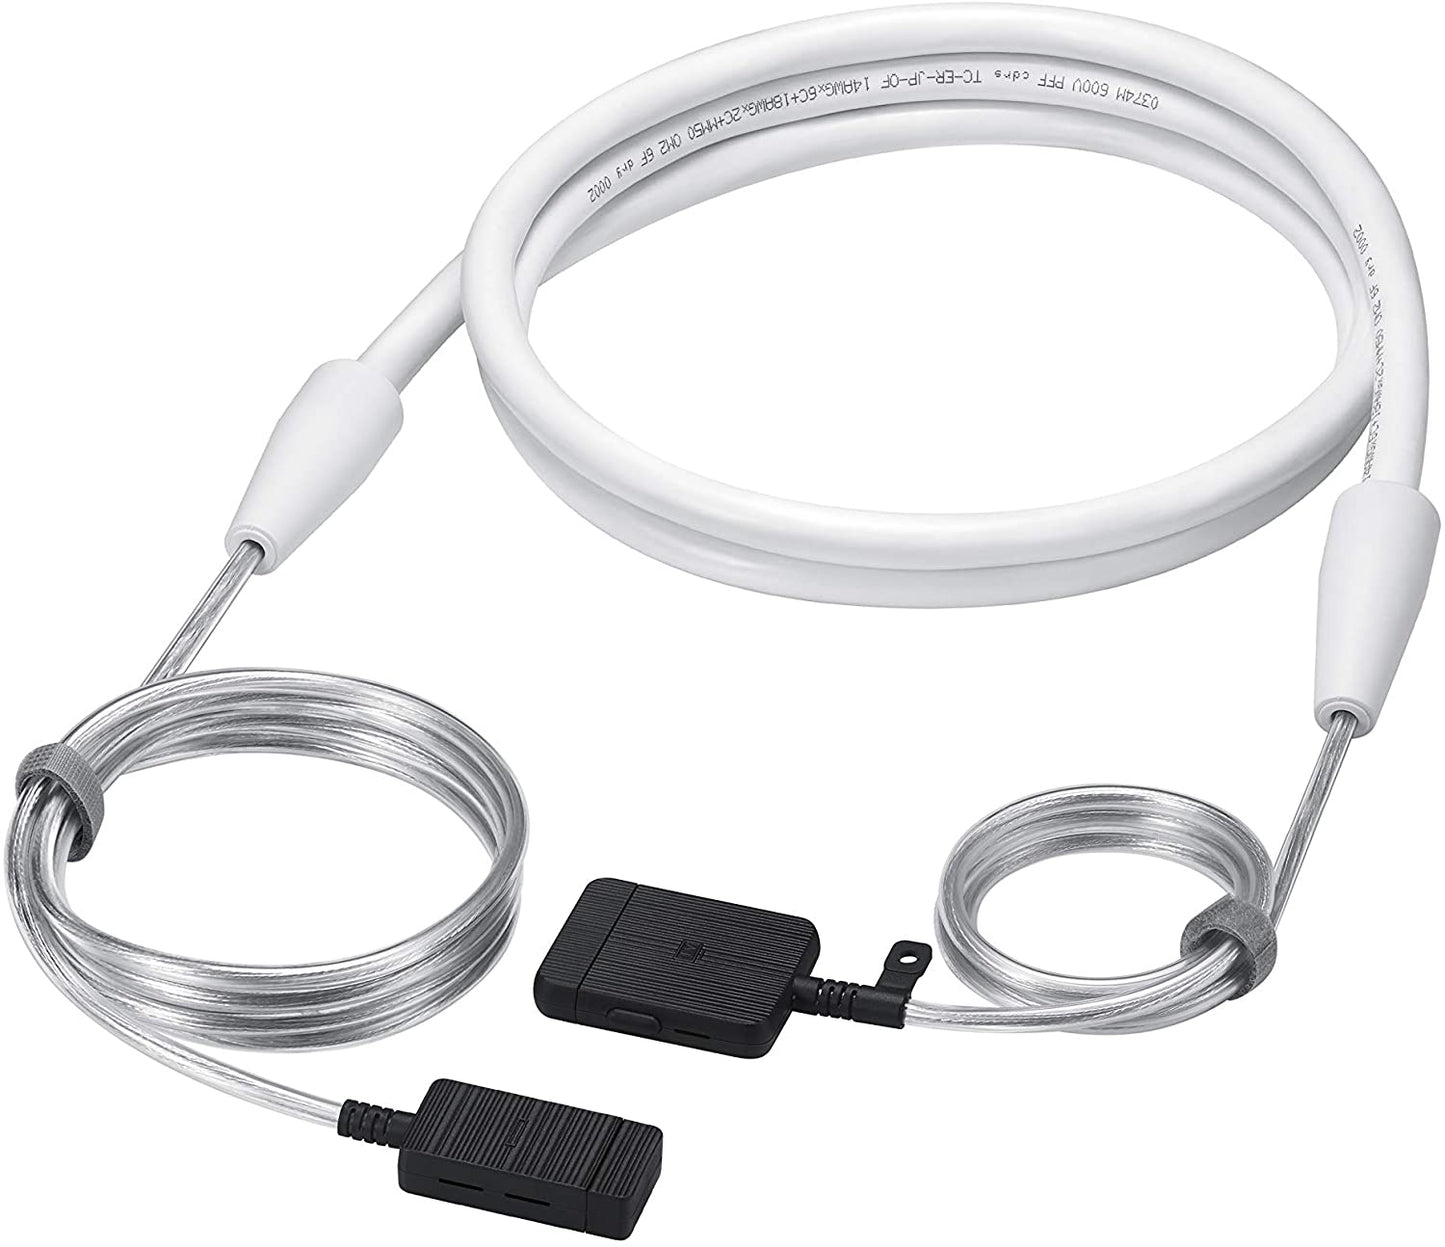 Samsung 5 Meter Long In-Wall Cable for 2019 One Connect Box TV's. (NOT Compatible with 32” Frame TV)